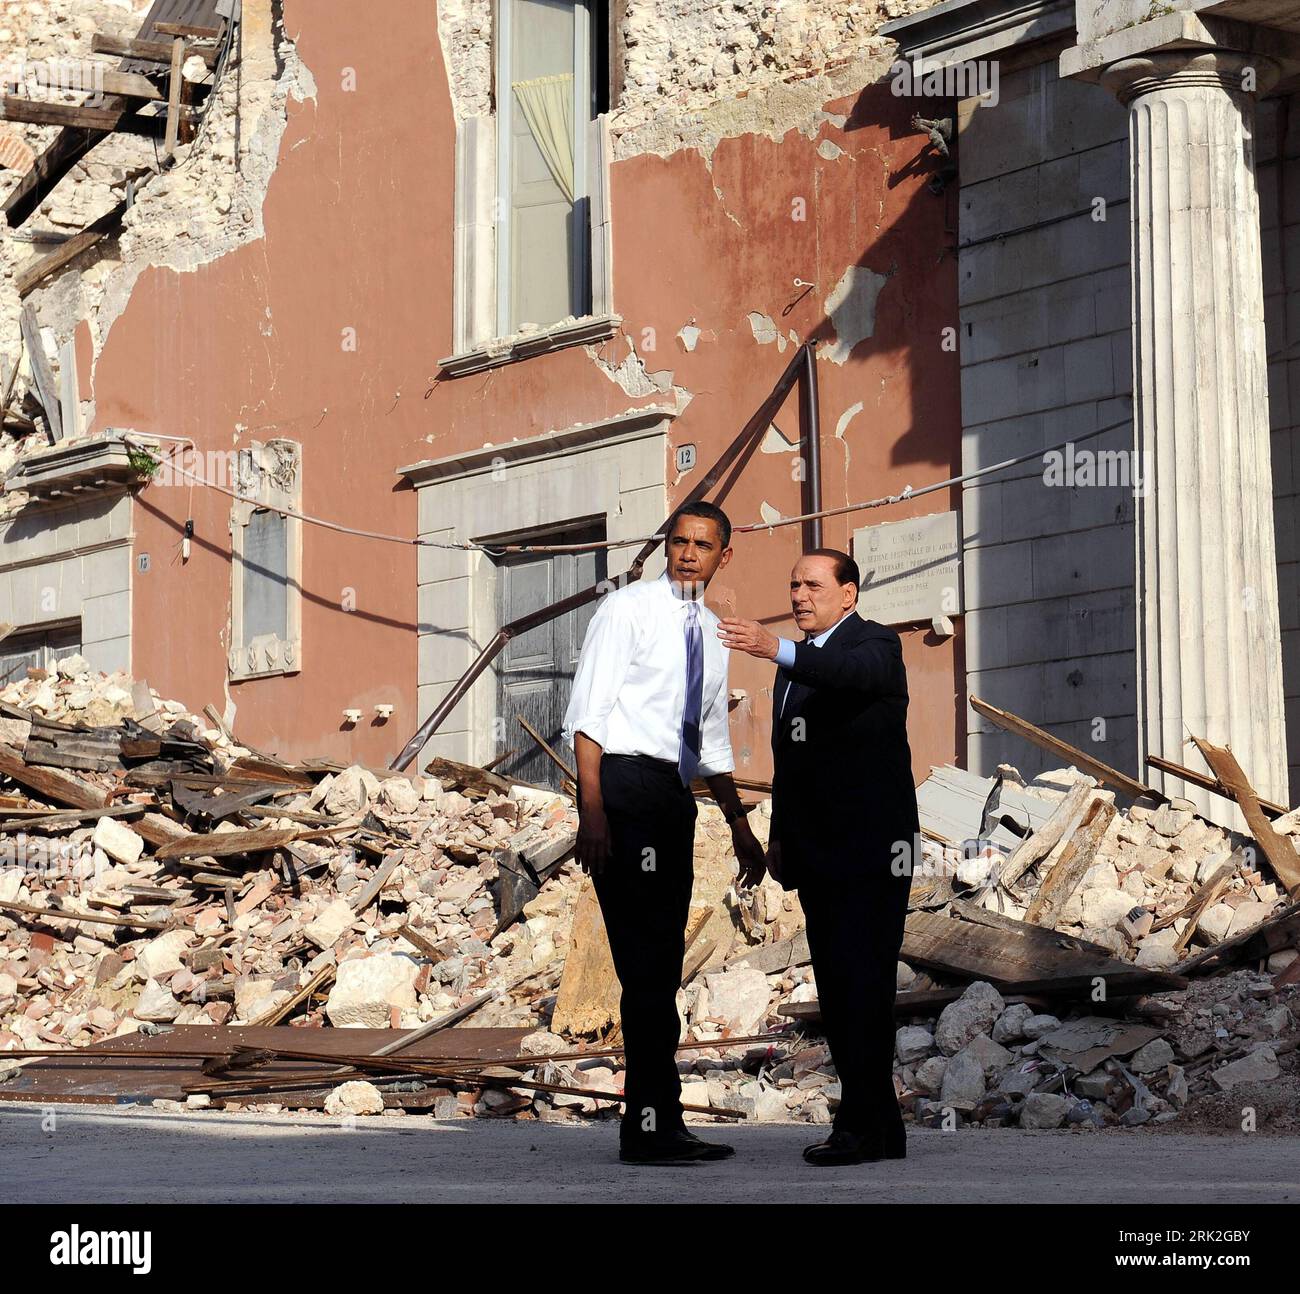 Bildnummer: 53186711  Datum: 09.07.2009  Copyright: imago/Xinhua (090709) -- L AQUILA, July 9, 2009 (Xinhua) -- Italian Prime Minister Silvio Berlusconi (R) and US President Barack Obama visit the historical center of L Aquila destroyed by the earthquake on April 6 in L Aquila, Italy, July 8, 2009, first day of the G8 Summit.     (Xinhua/Pool) (msq) (2)ITALY-L AQUILA-G8-OBAMA-QUAKE-VISIT  PUBLICATIONxNOTxINxCHN  premiumd People Politik Erdbeben g8 Gipfel Kbdig xdp  2009 quer  o0 G 8, Laquila, USA    Bildnummer 53186711 Date 09 07 2009 Copyright Imago XINHUA 090709 l Aquila July 9 2009 XINHUA I Stock Photo